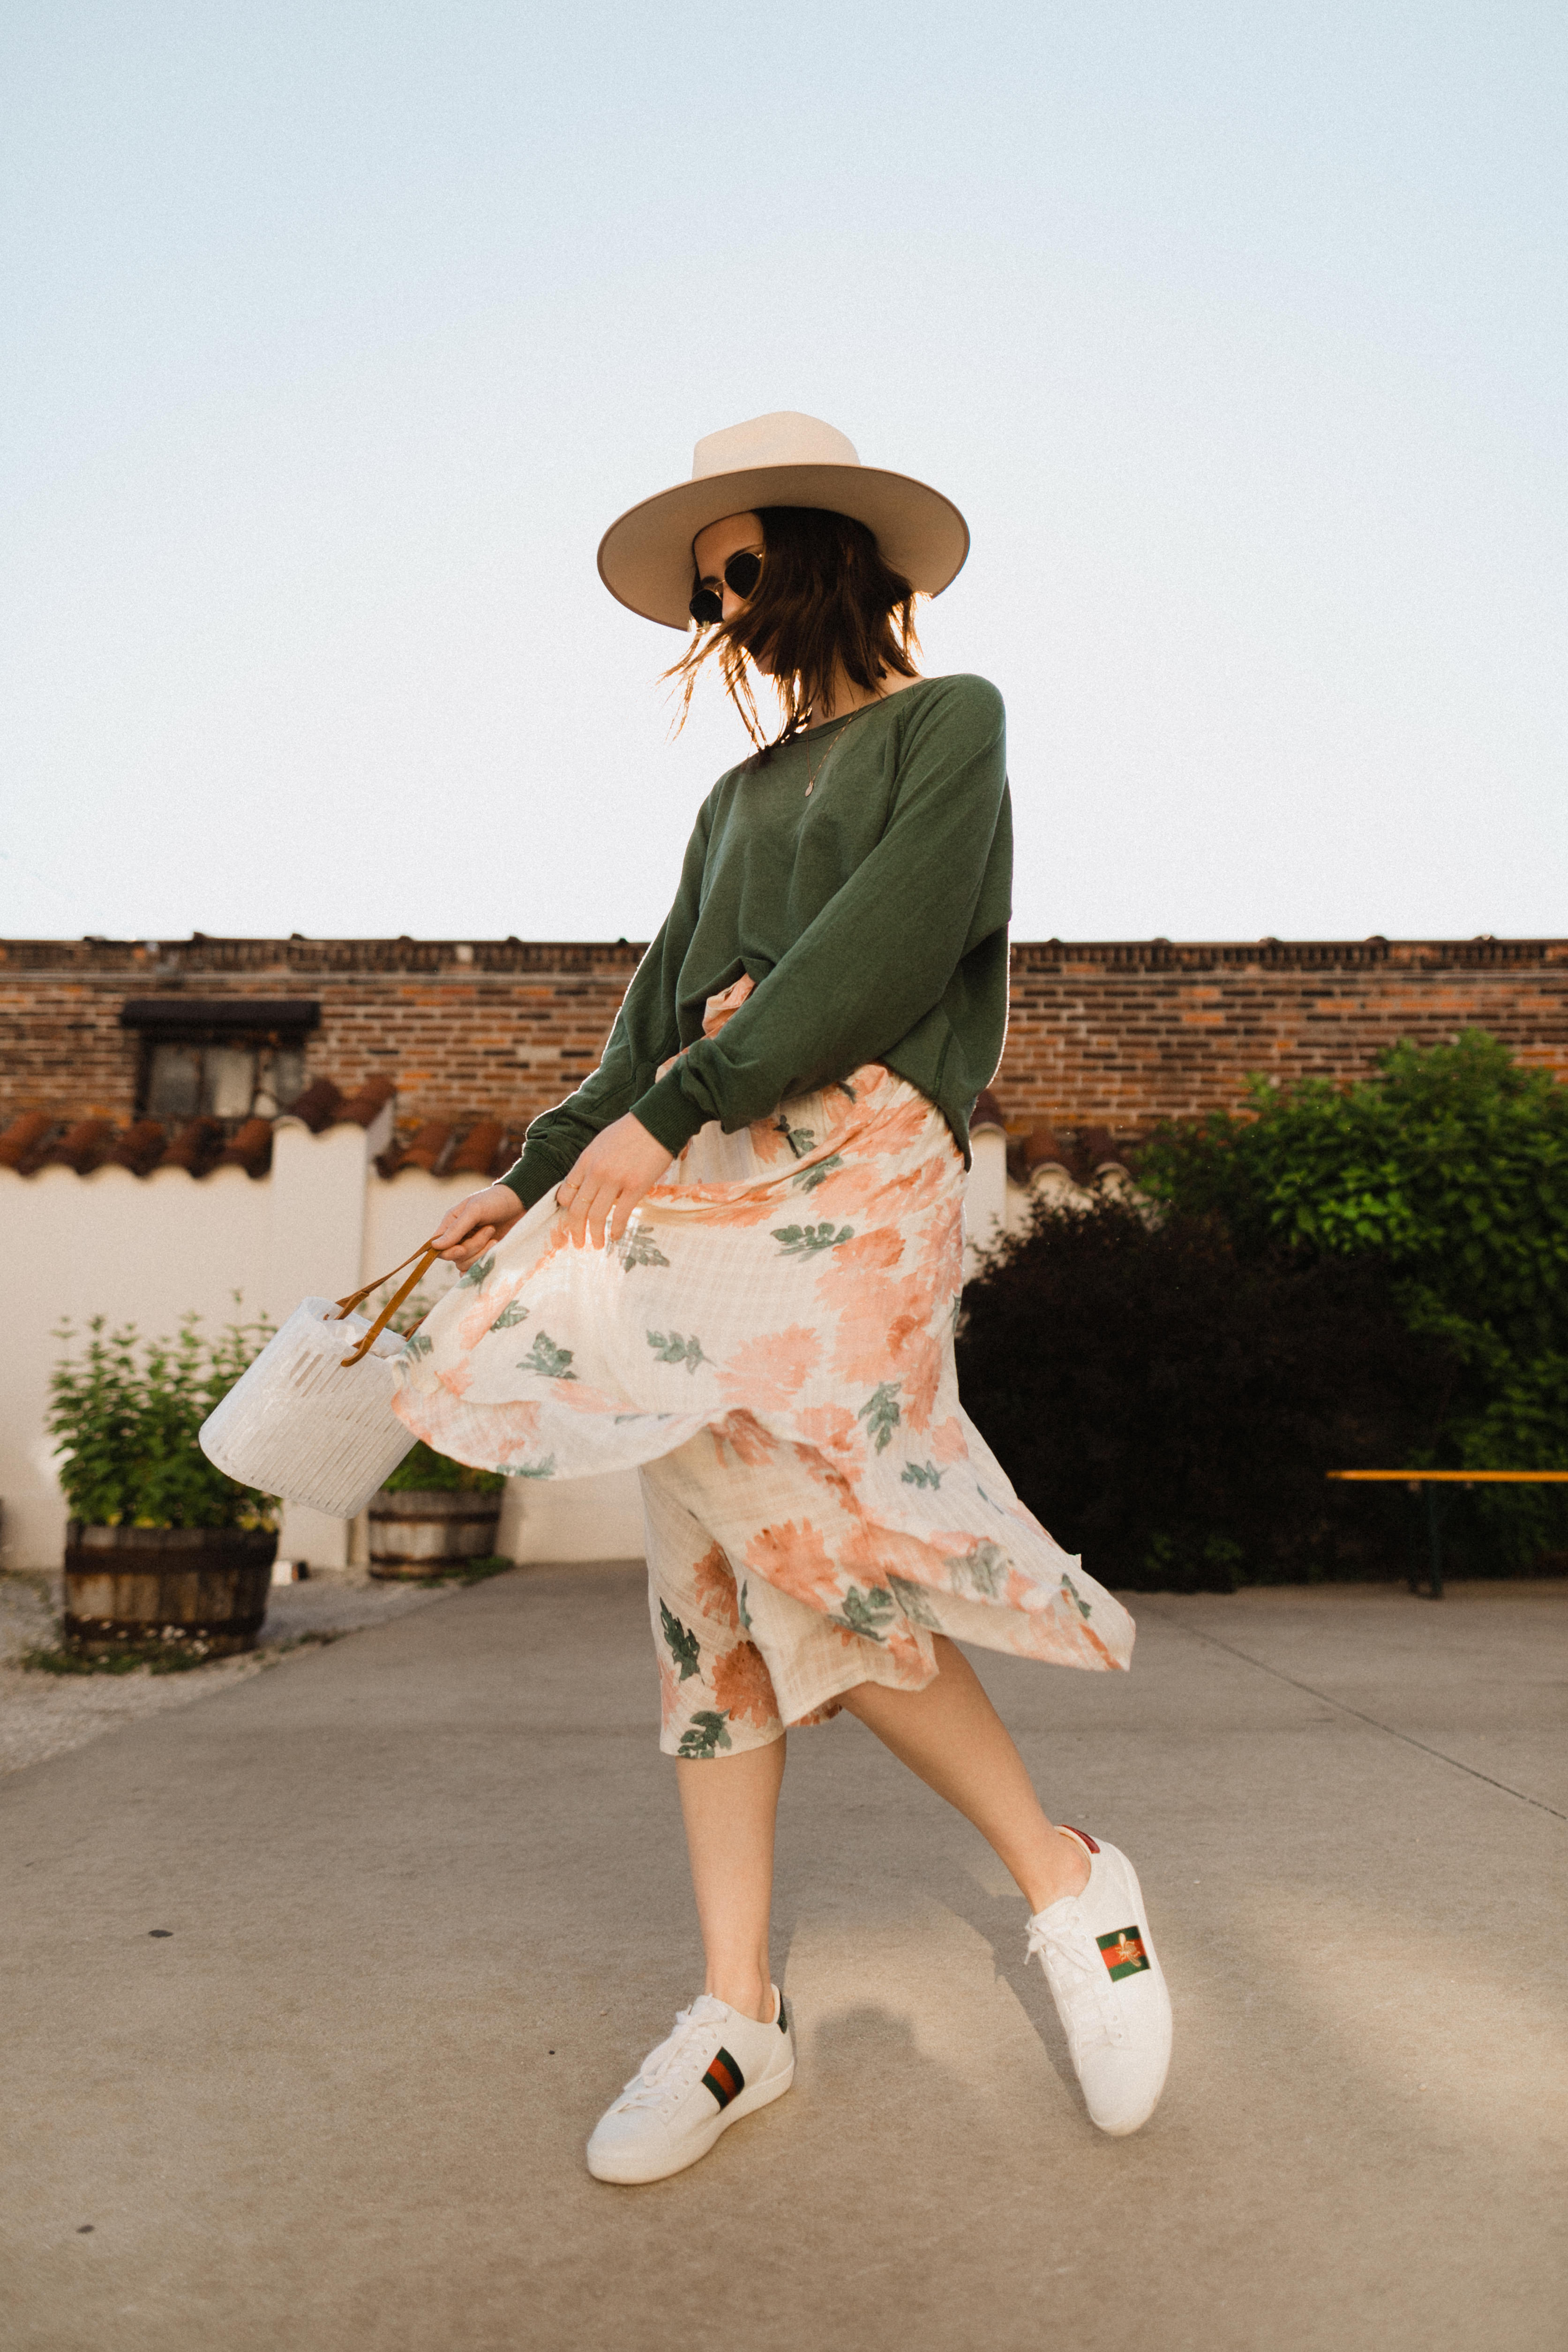 Lovestitch Clothing: 7 Outfits To Wear This Summer | skirt and sneakers outfit | skirt and sneakers outfit summer | skirt and sneakers outfit casual | midi skirt outfit casual | casual summer outfit ideas | midi skirt outfit summer | Oh Darling Blog